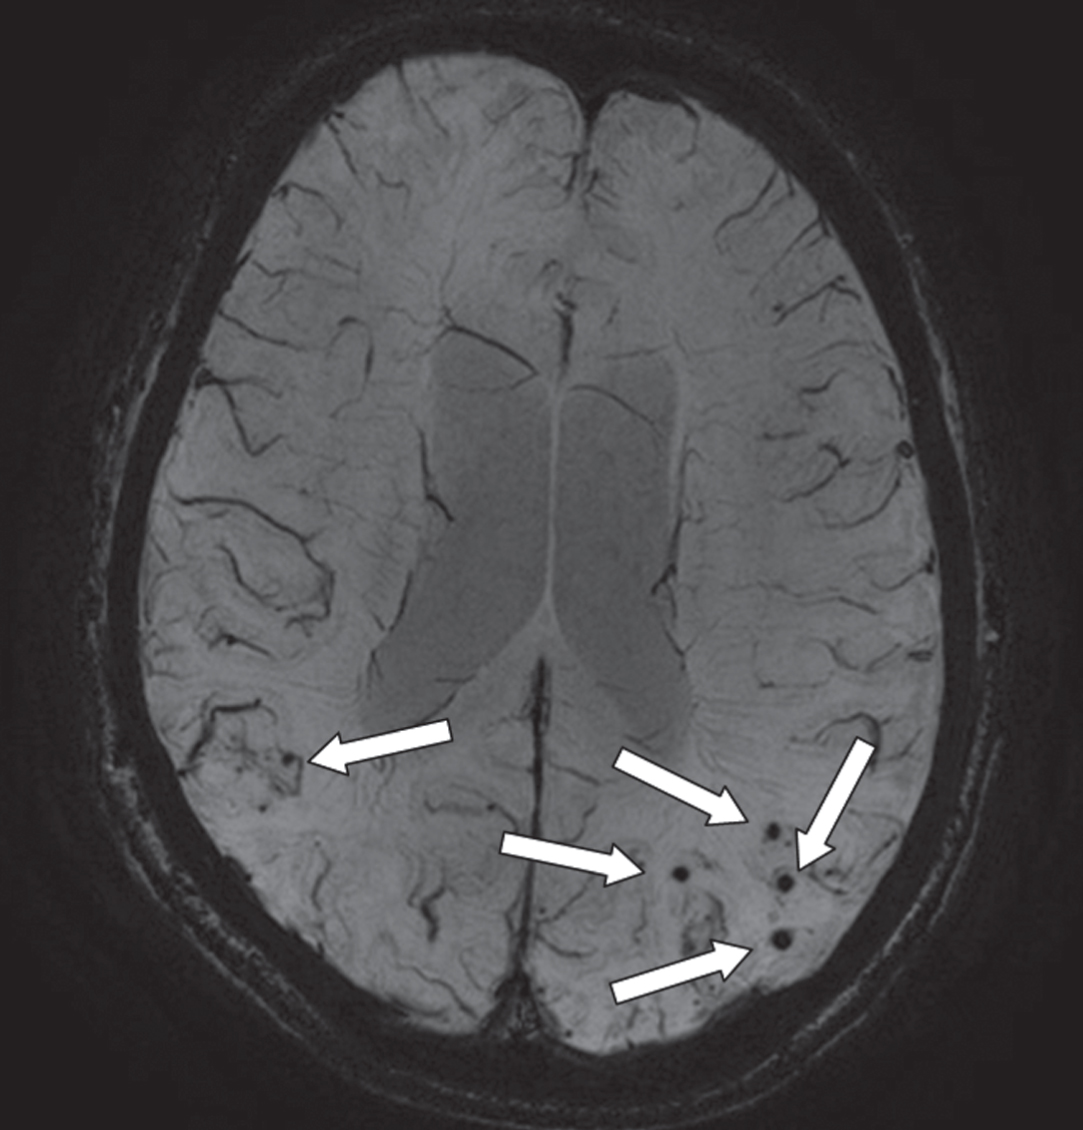 An axial MRI image of a susceptibility weighted image (SWI) that provides information on the presence of microbleeds (arrows; occipital part of the cortex). This is an image of a 68-year-old male with a diagnosis of Alzheimer’s disease. On presentation, he had an MMSE of 23. On MRI, there was evidence of moderate atrophy of the medial temporal lobe, mild global cortical atrophy, beginning confluent white matter hyperintensities and multiple microbleeds (mostly with a lobar location).